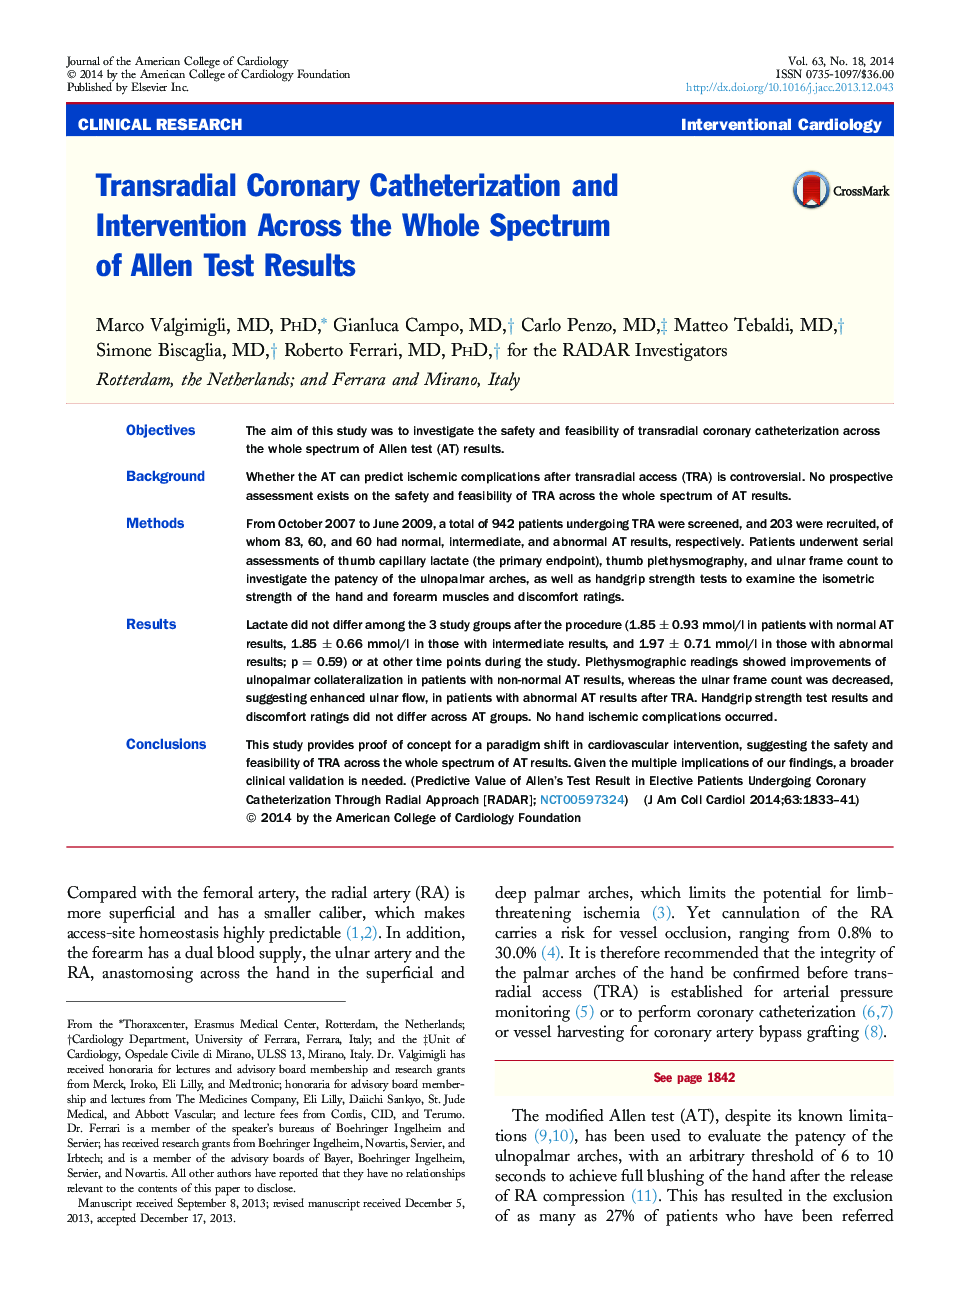 Transradial Coronary Catheterization and Intervention Across the Whole Spectrum of Allen Test Results 